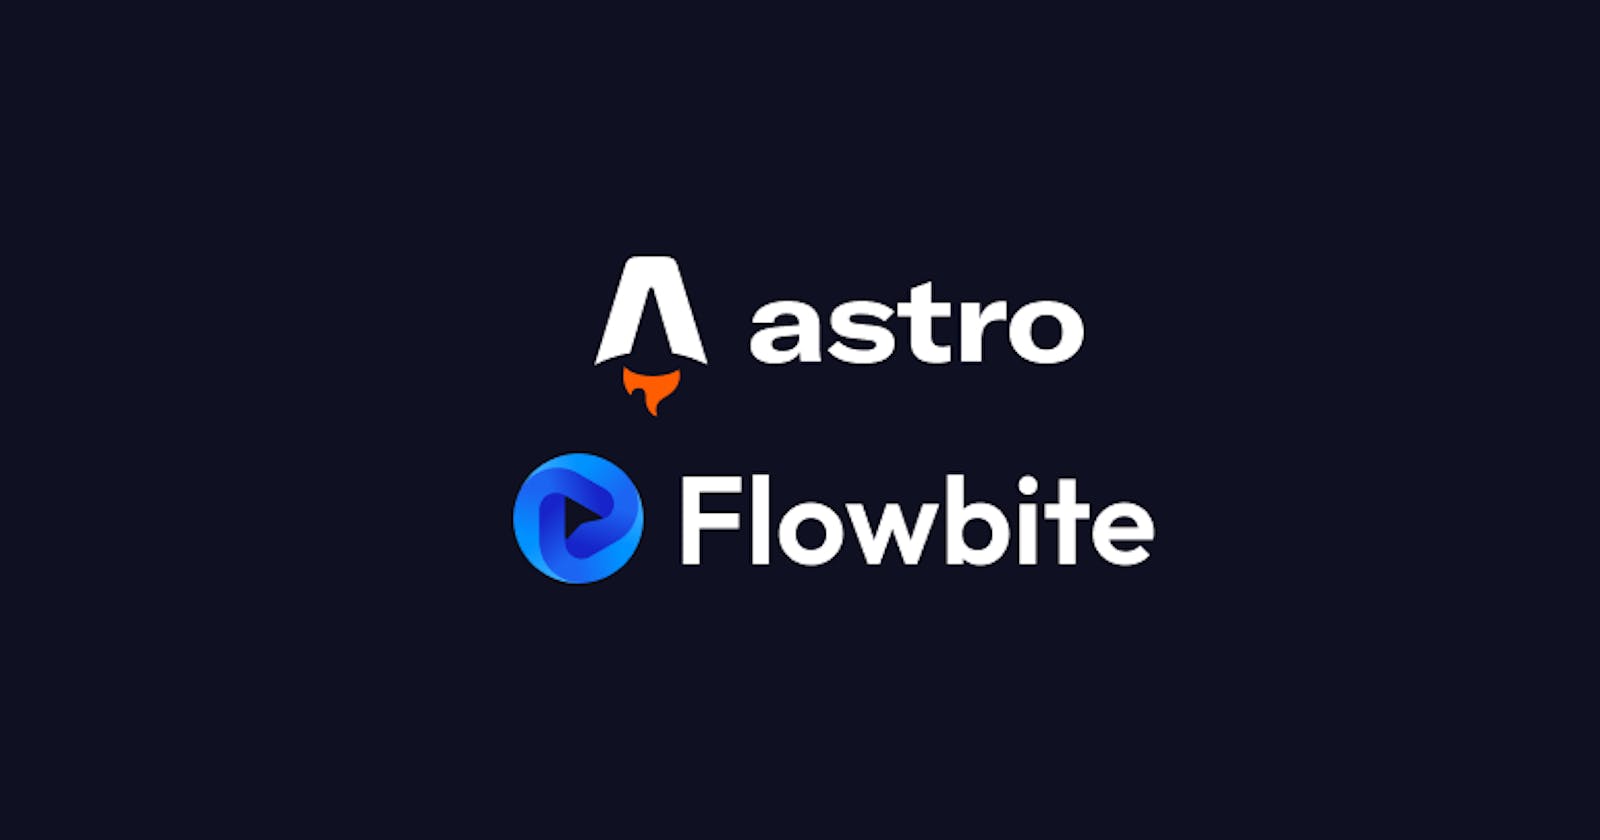 How to install Astro with Tailwind CSS and Flowbite